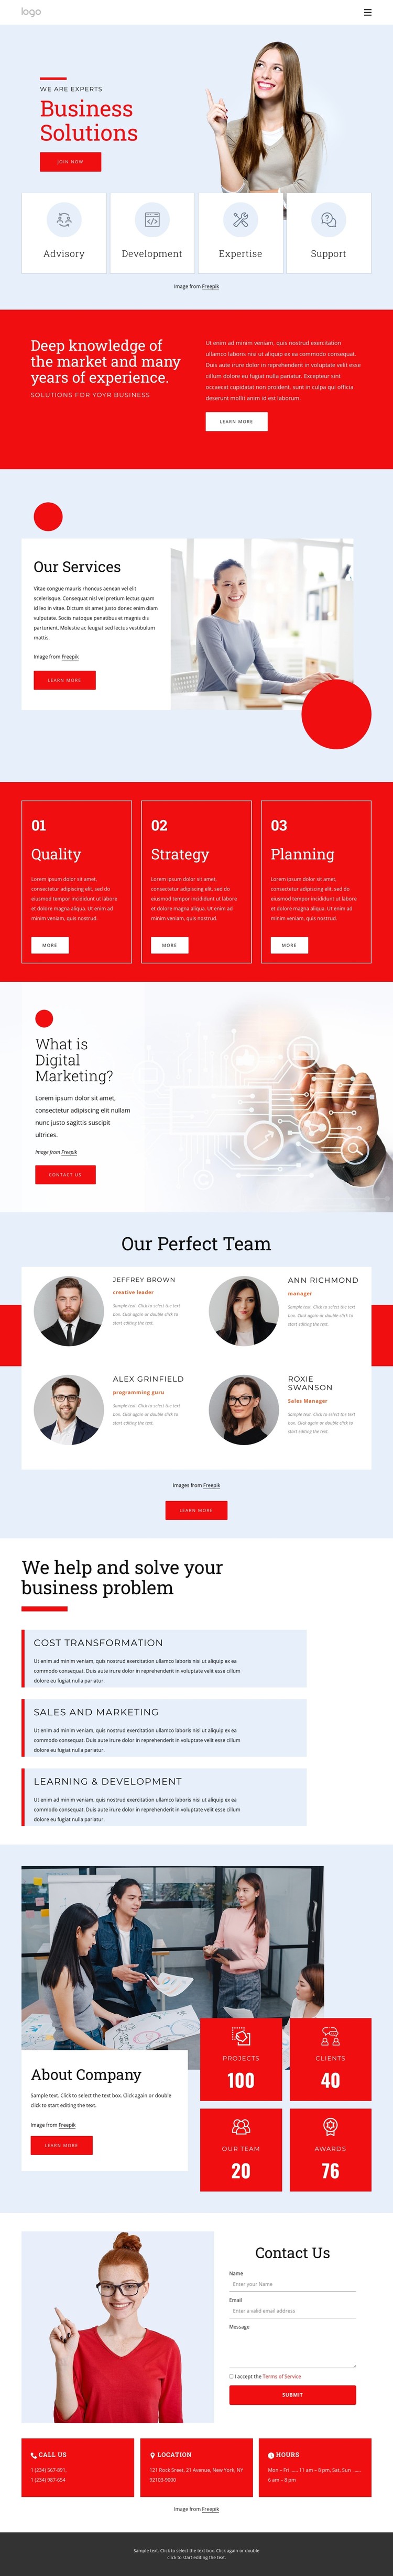 We are experts in business solutions CSS Template